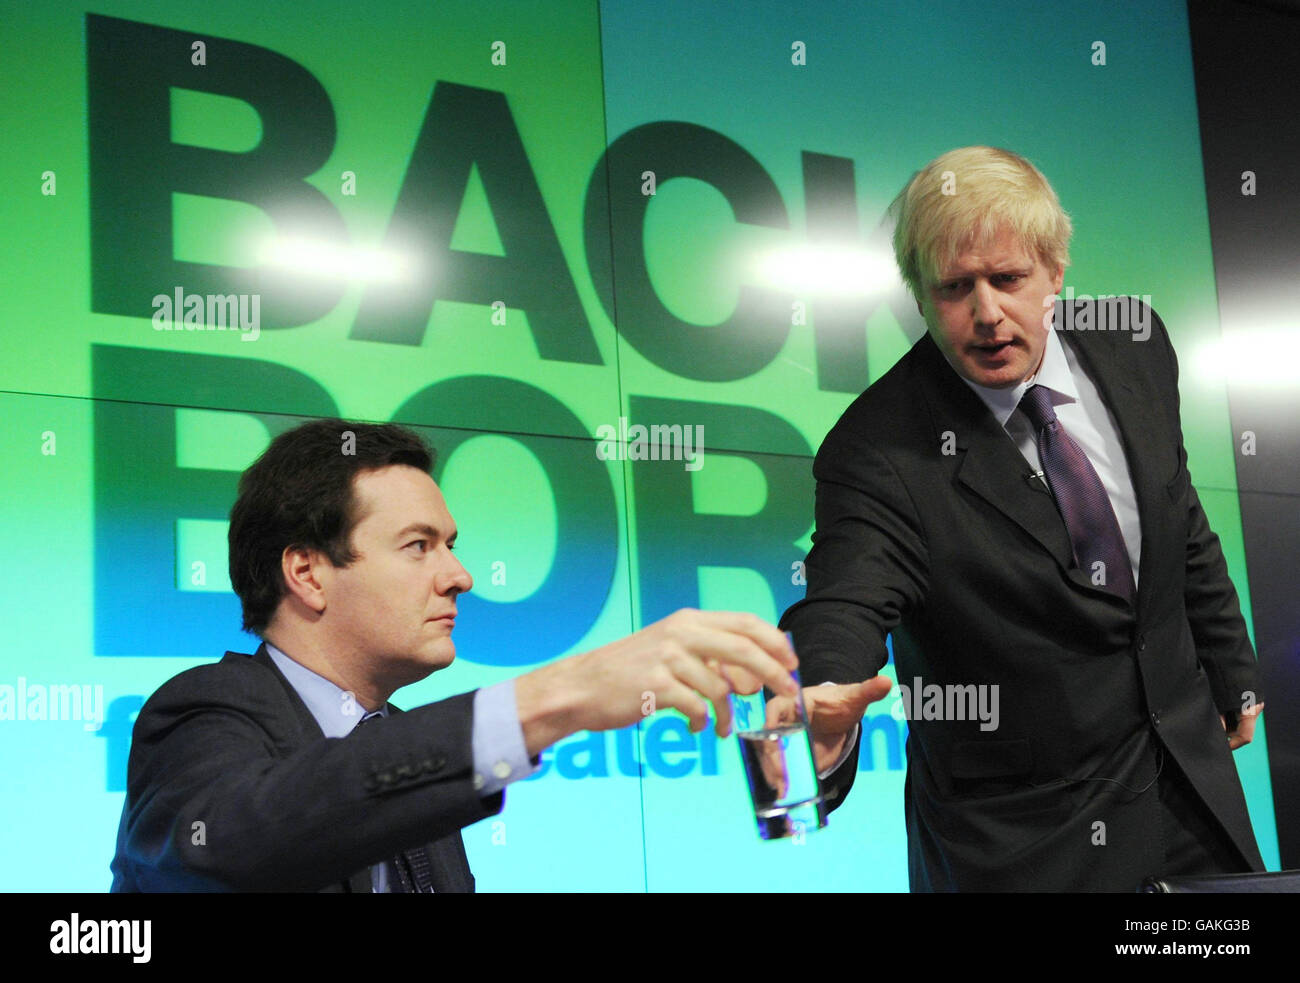 Shadow Chancellor George Osborne hands Conservative candidate for London Mayor Boris Johnson a glass of water as he prepares to make a speech on the economy of London at Bloomberg's offices in the City of London, ahead of this week's budget. Stock Photo